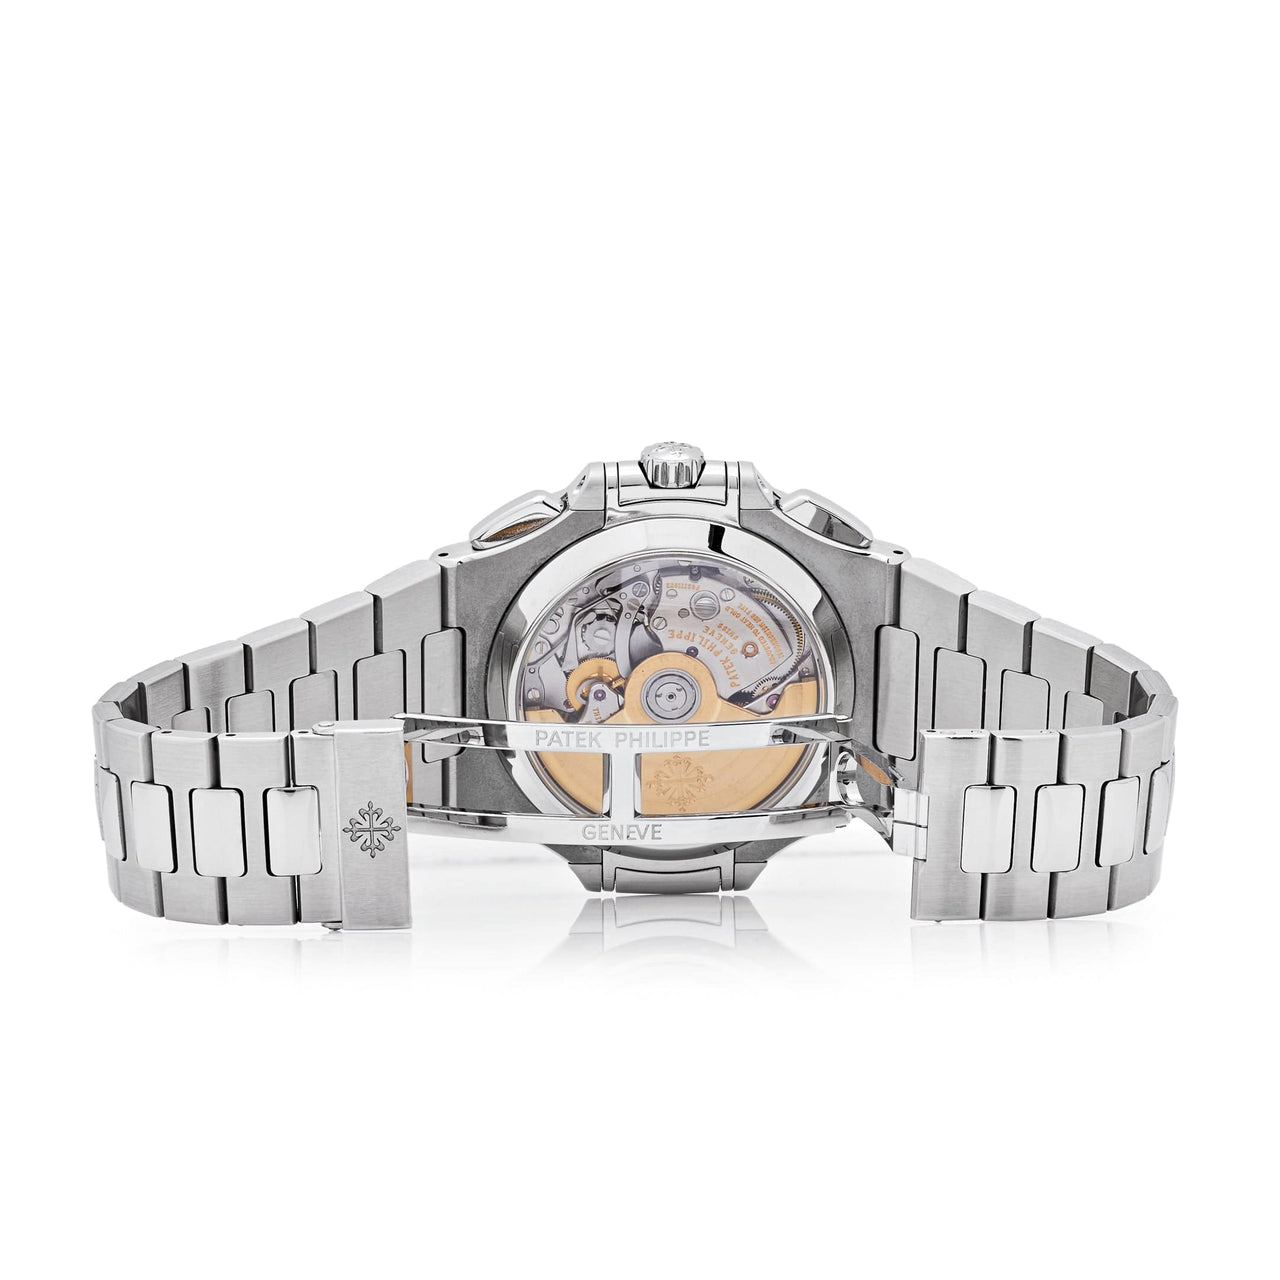 Patek Philippe Nautilus 5980/1A-019 Stainless Steel Chronograph Date White Dial (2015)